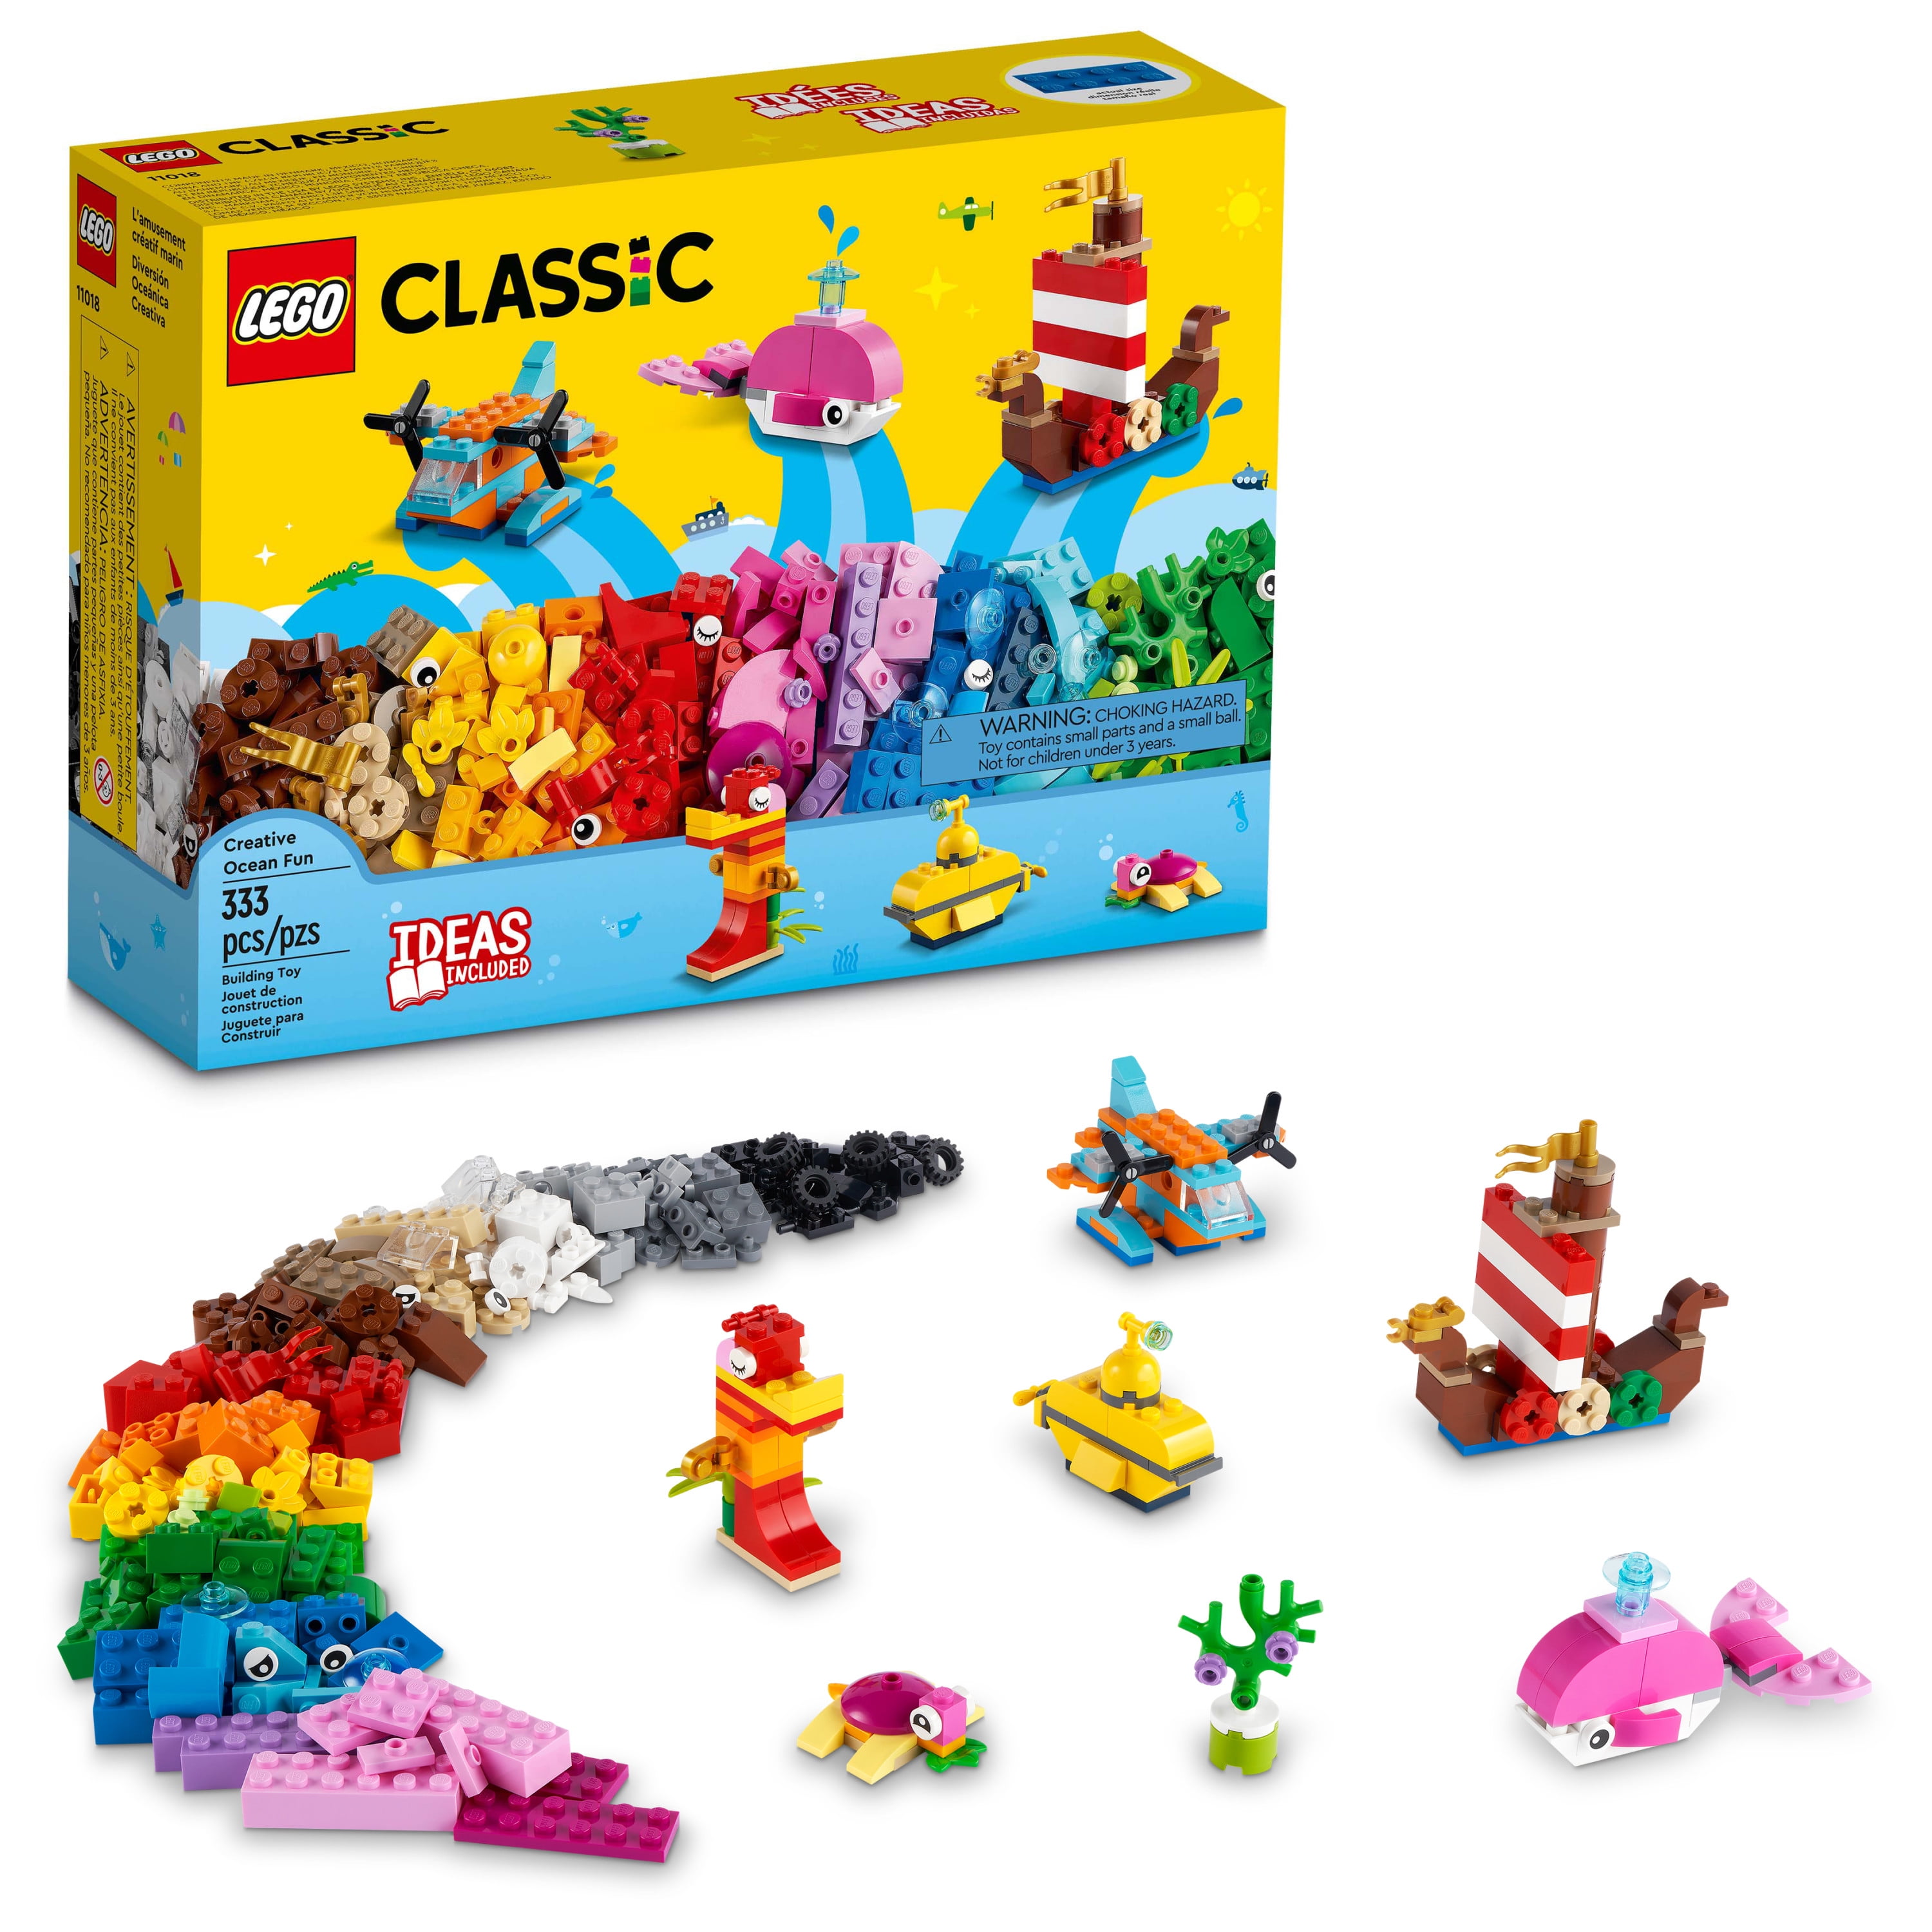 LEGO Classic Creative Ocean Fun 11018 Building Kit; With 6 Mini Builds, Including a Viking Ship and a Yellow Submarine, Plus Extra Bricks for Imaginative Play; Educational Toy for Ages 4+ (333 Pieces)